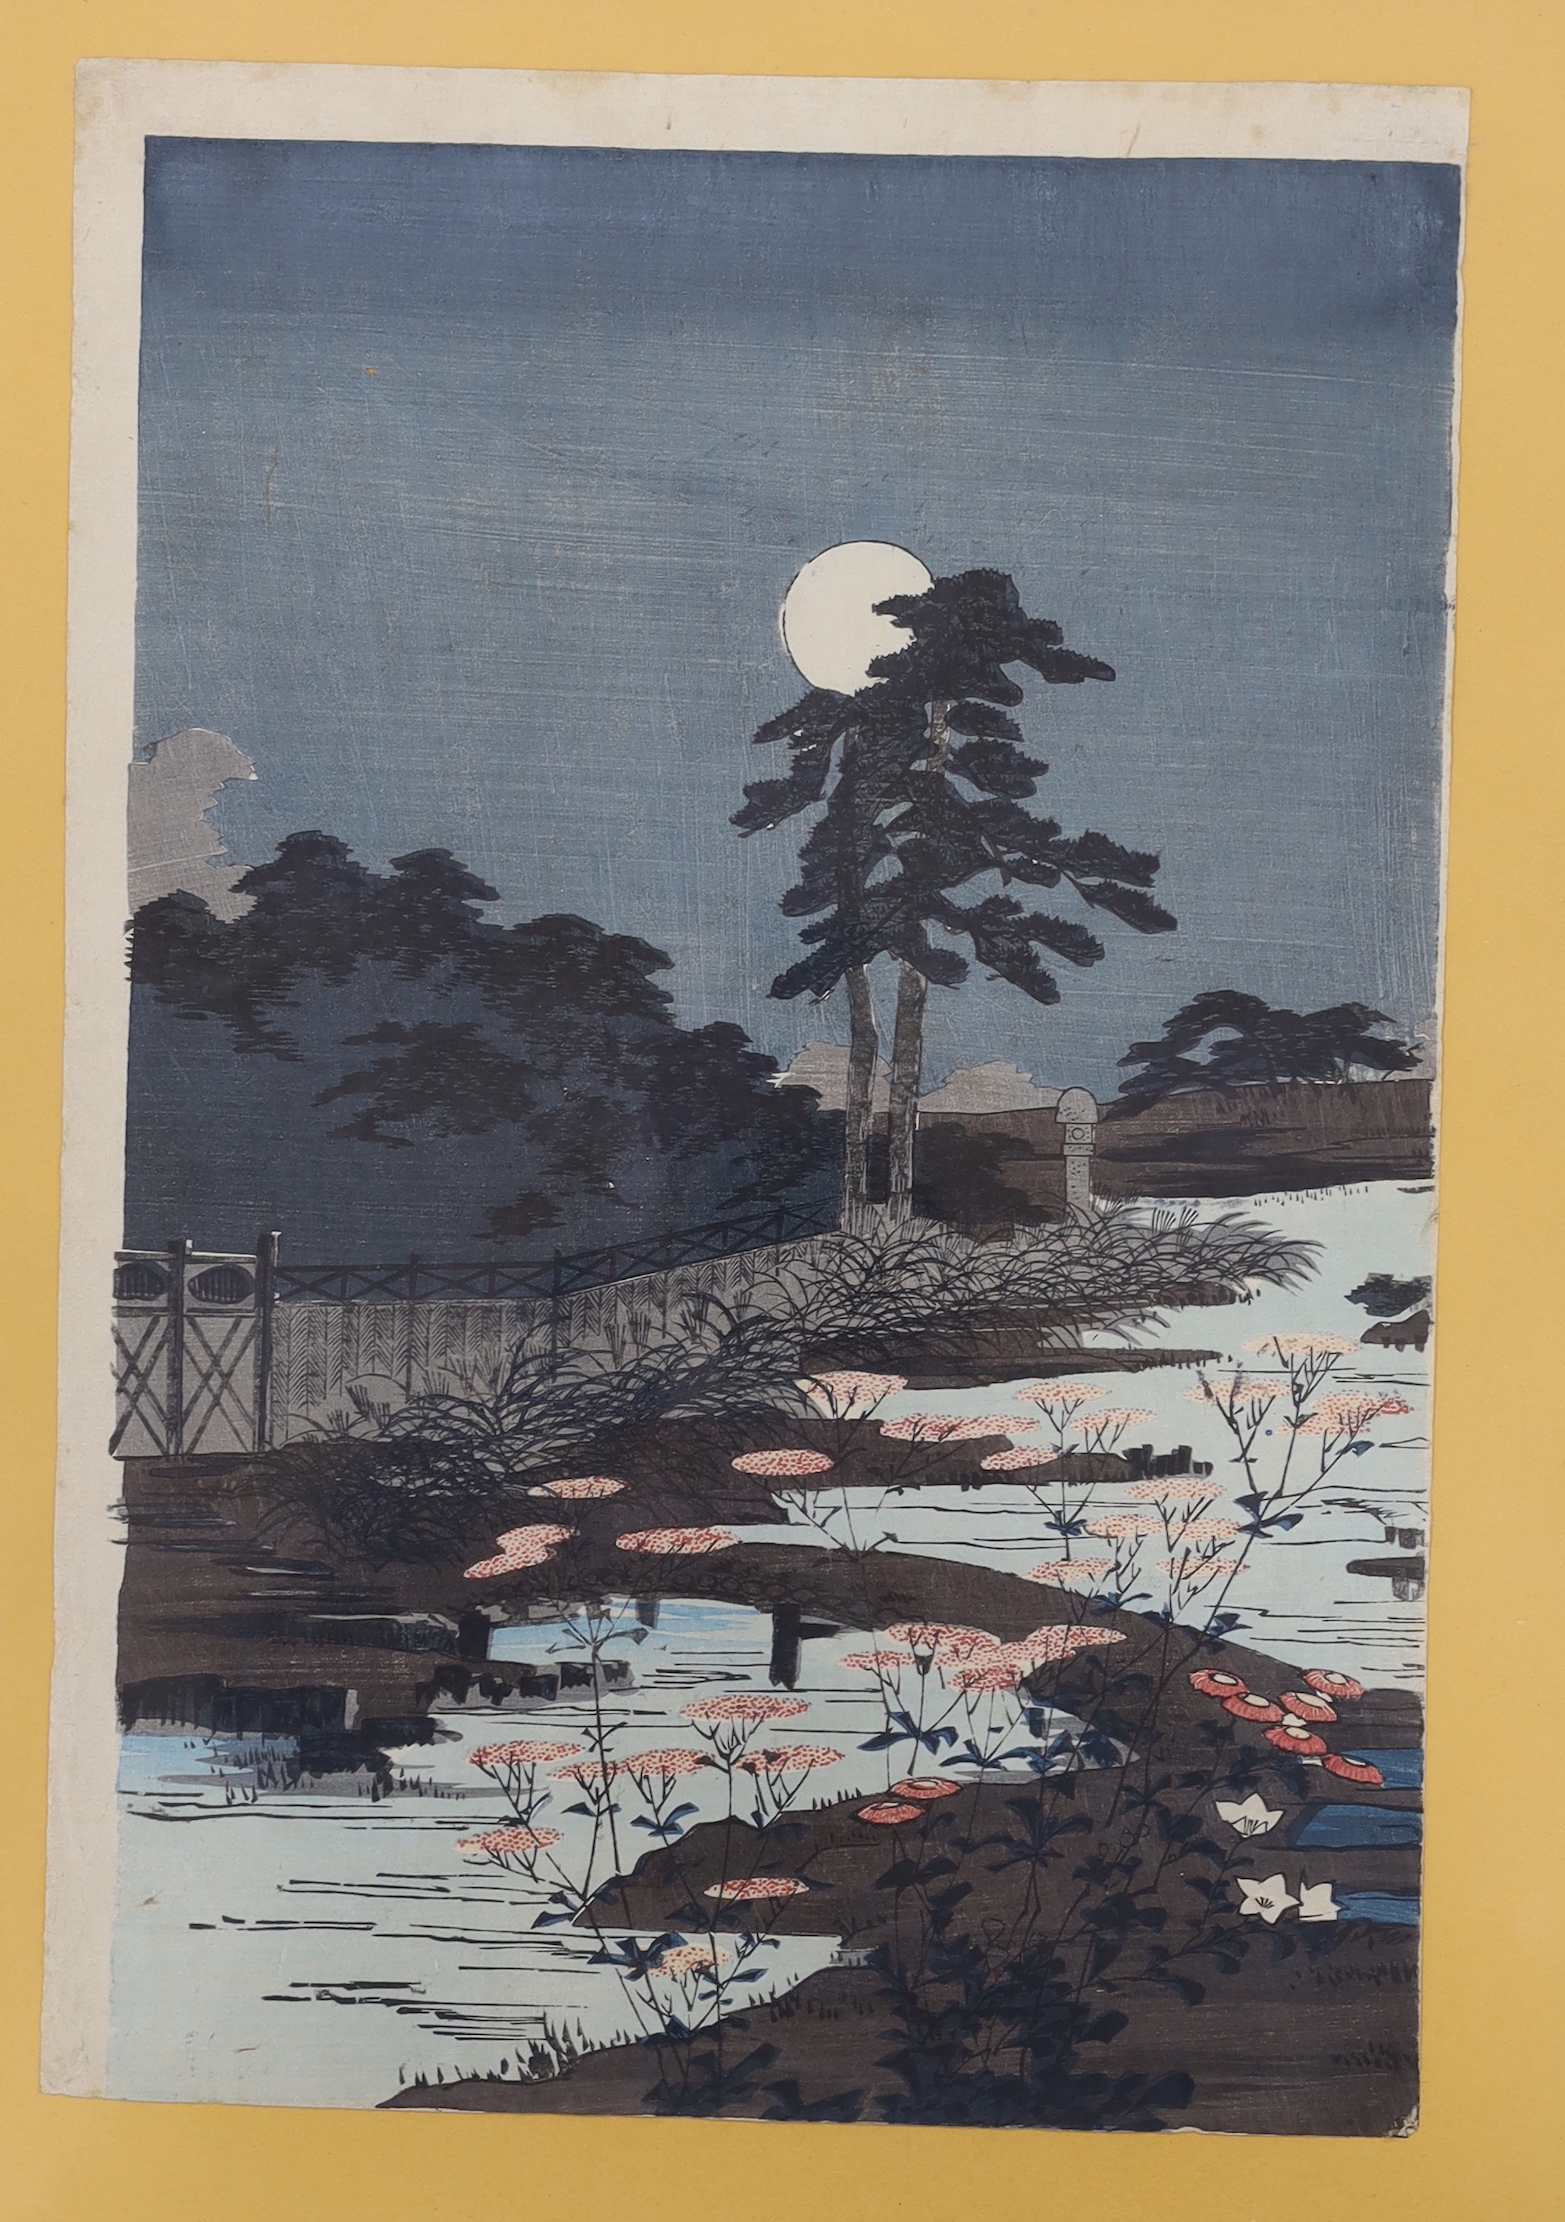 Five Japanese woodblock prints including one by Toyohara Chikanobu (1838-1912) 'Bridge over water' and four others, women wearing kimonos, each 37 x 25cm